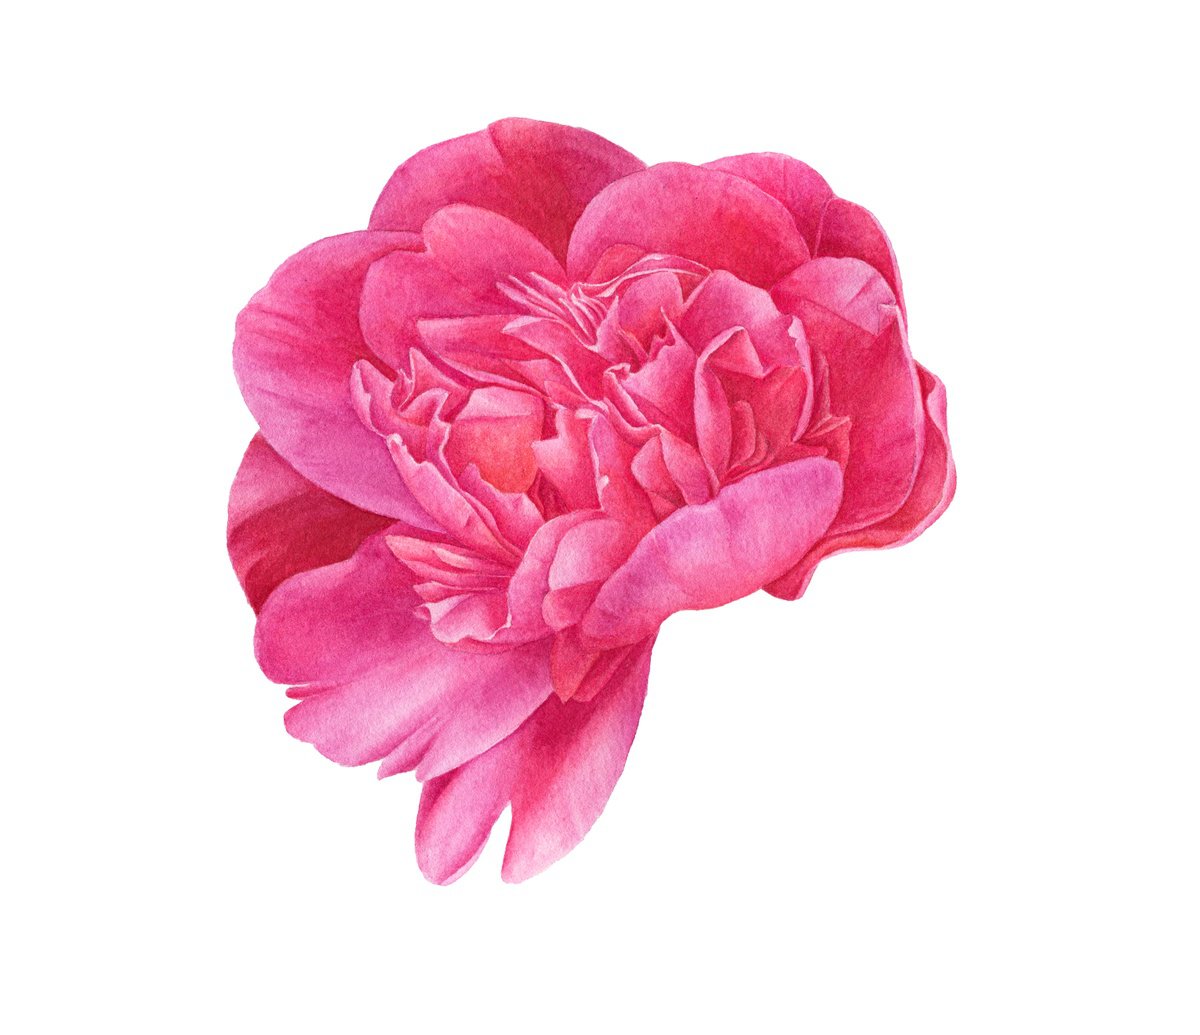 Pink Peony in frame by Alona Hrinchuk